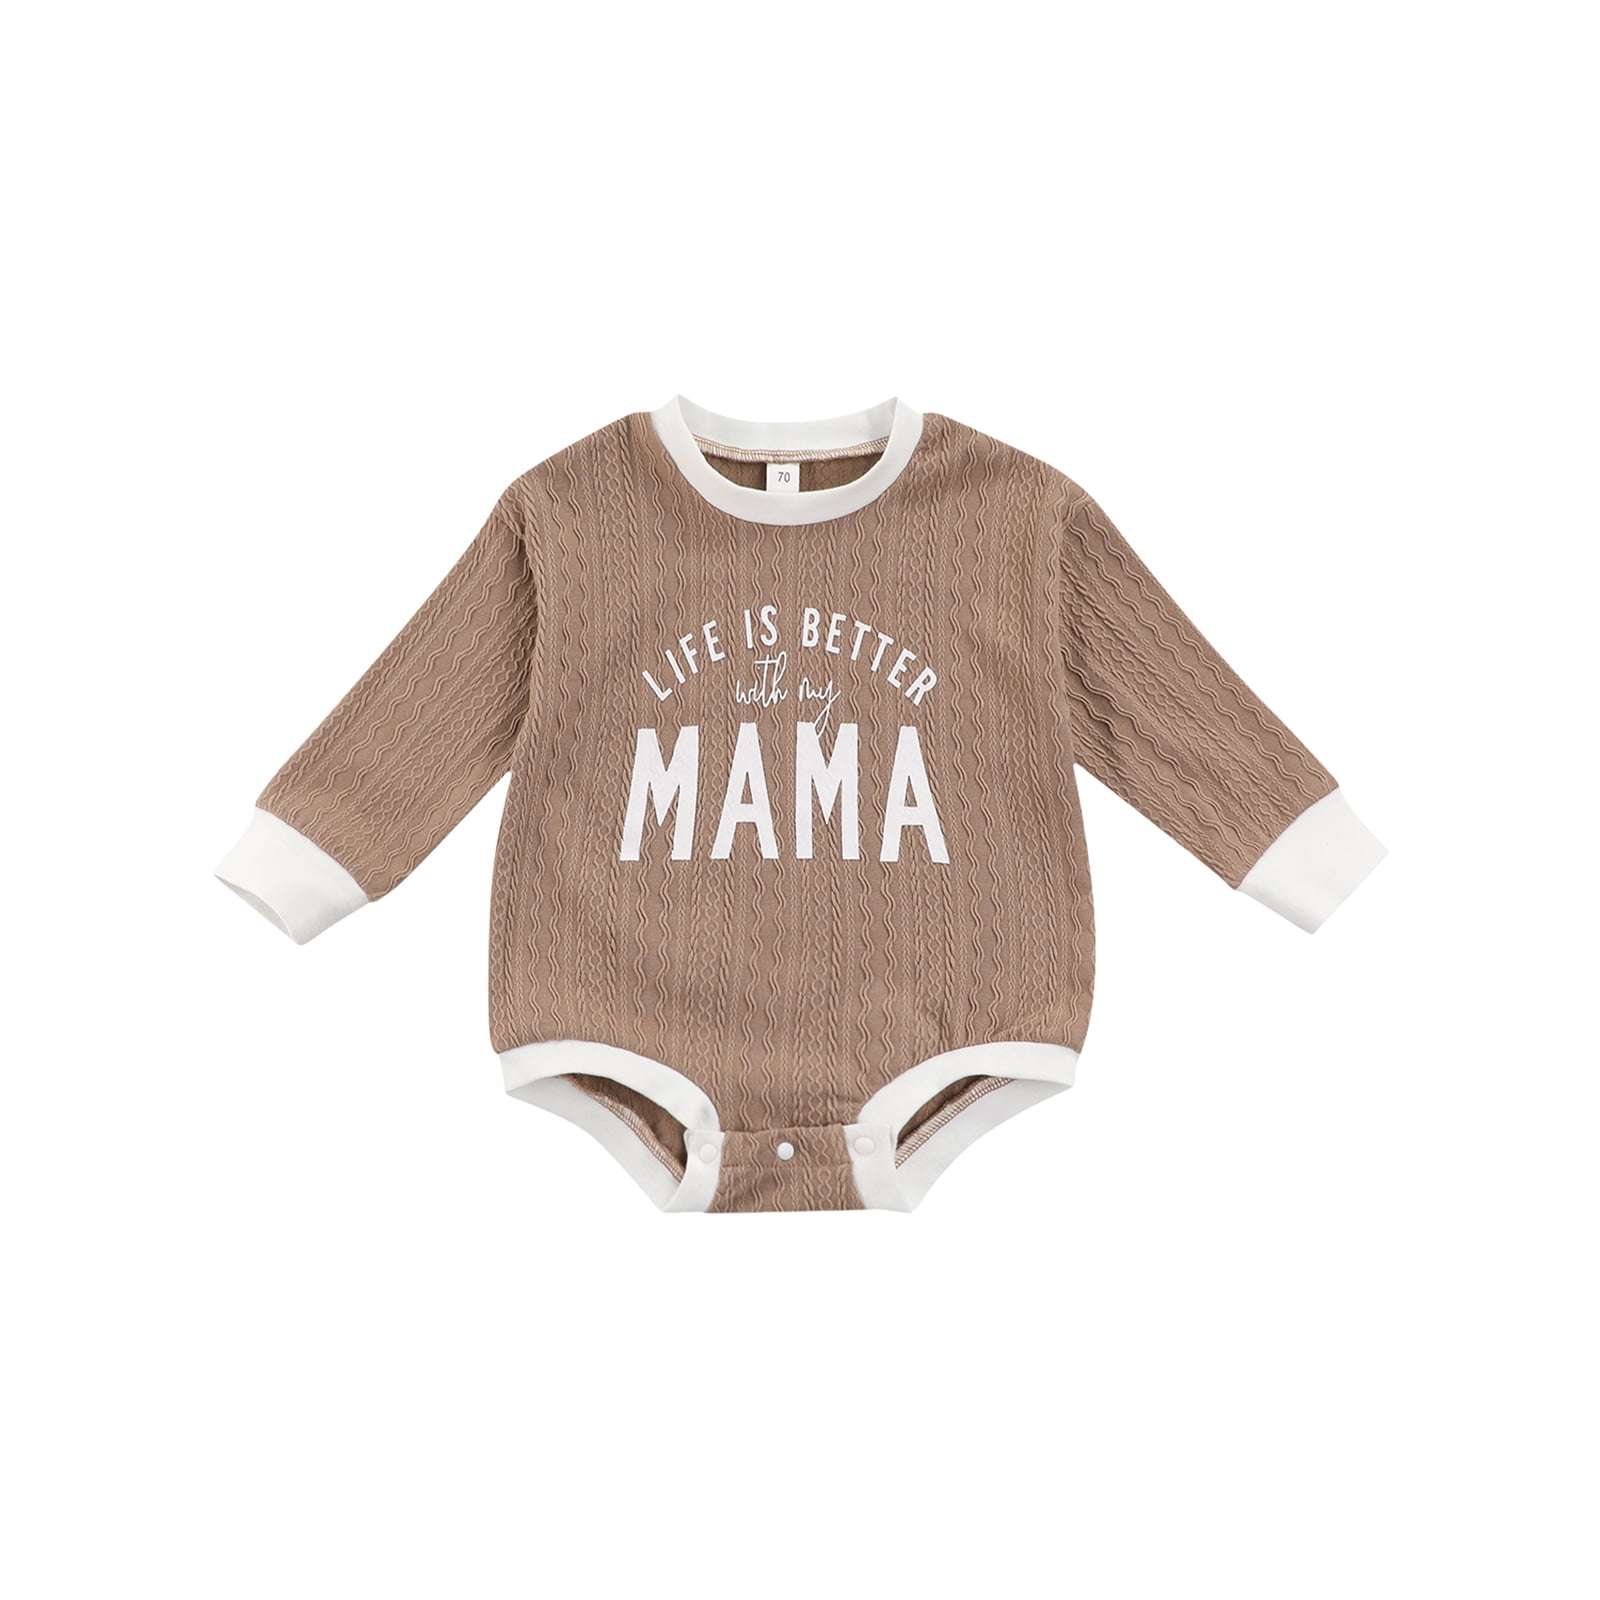 Details about   Fashion Baby 0-2T Newborn Toddler Infant Boys Girls Cute Cartoon Animal Sweater 